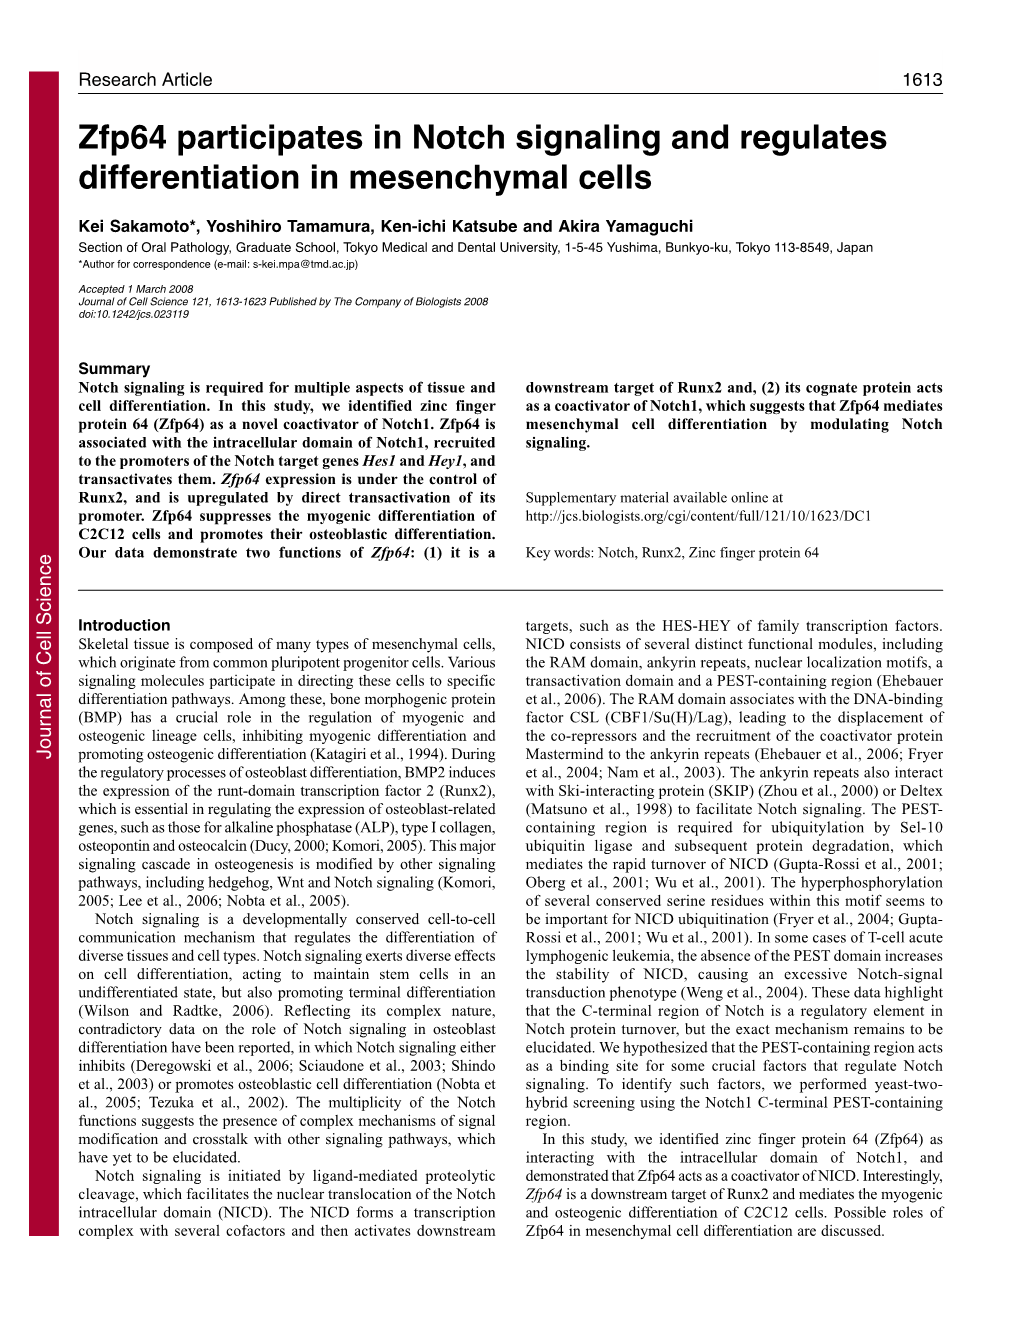 Zfp64 Participates in Notch Signaling and Regulates Differentiation in Mesenchymal Cells